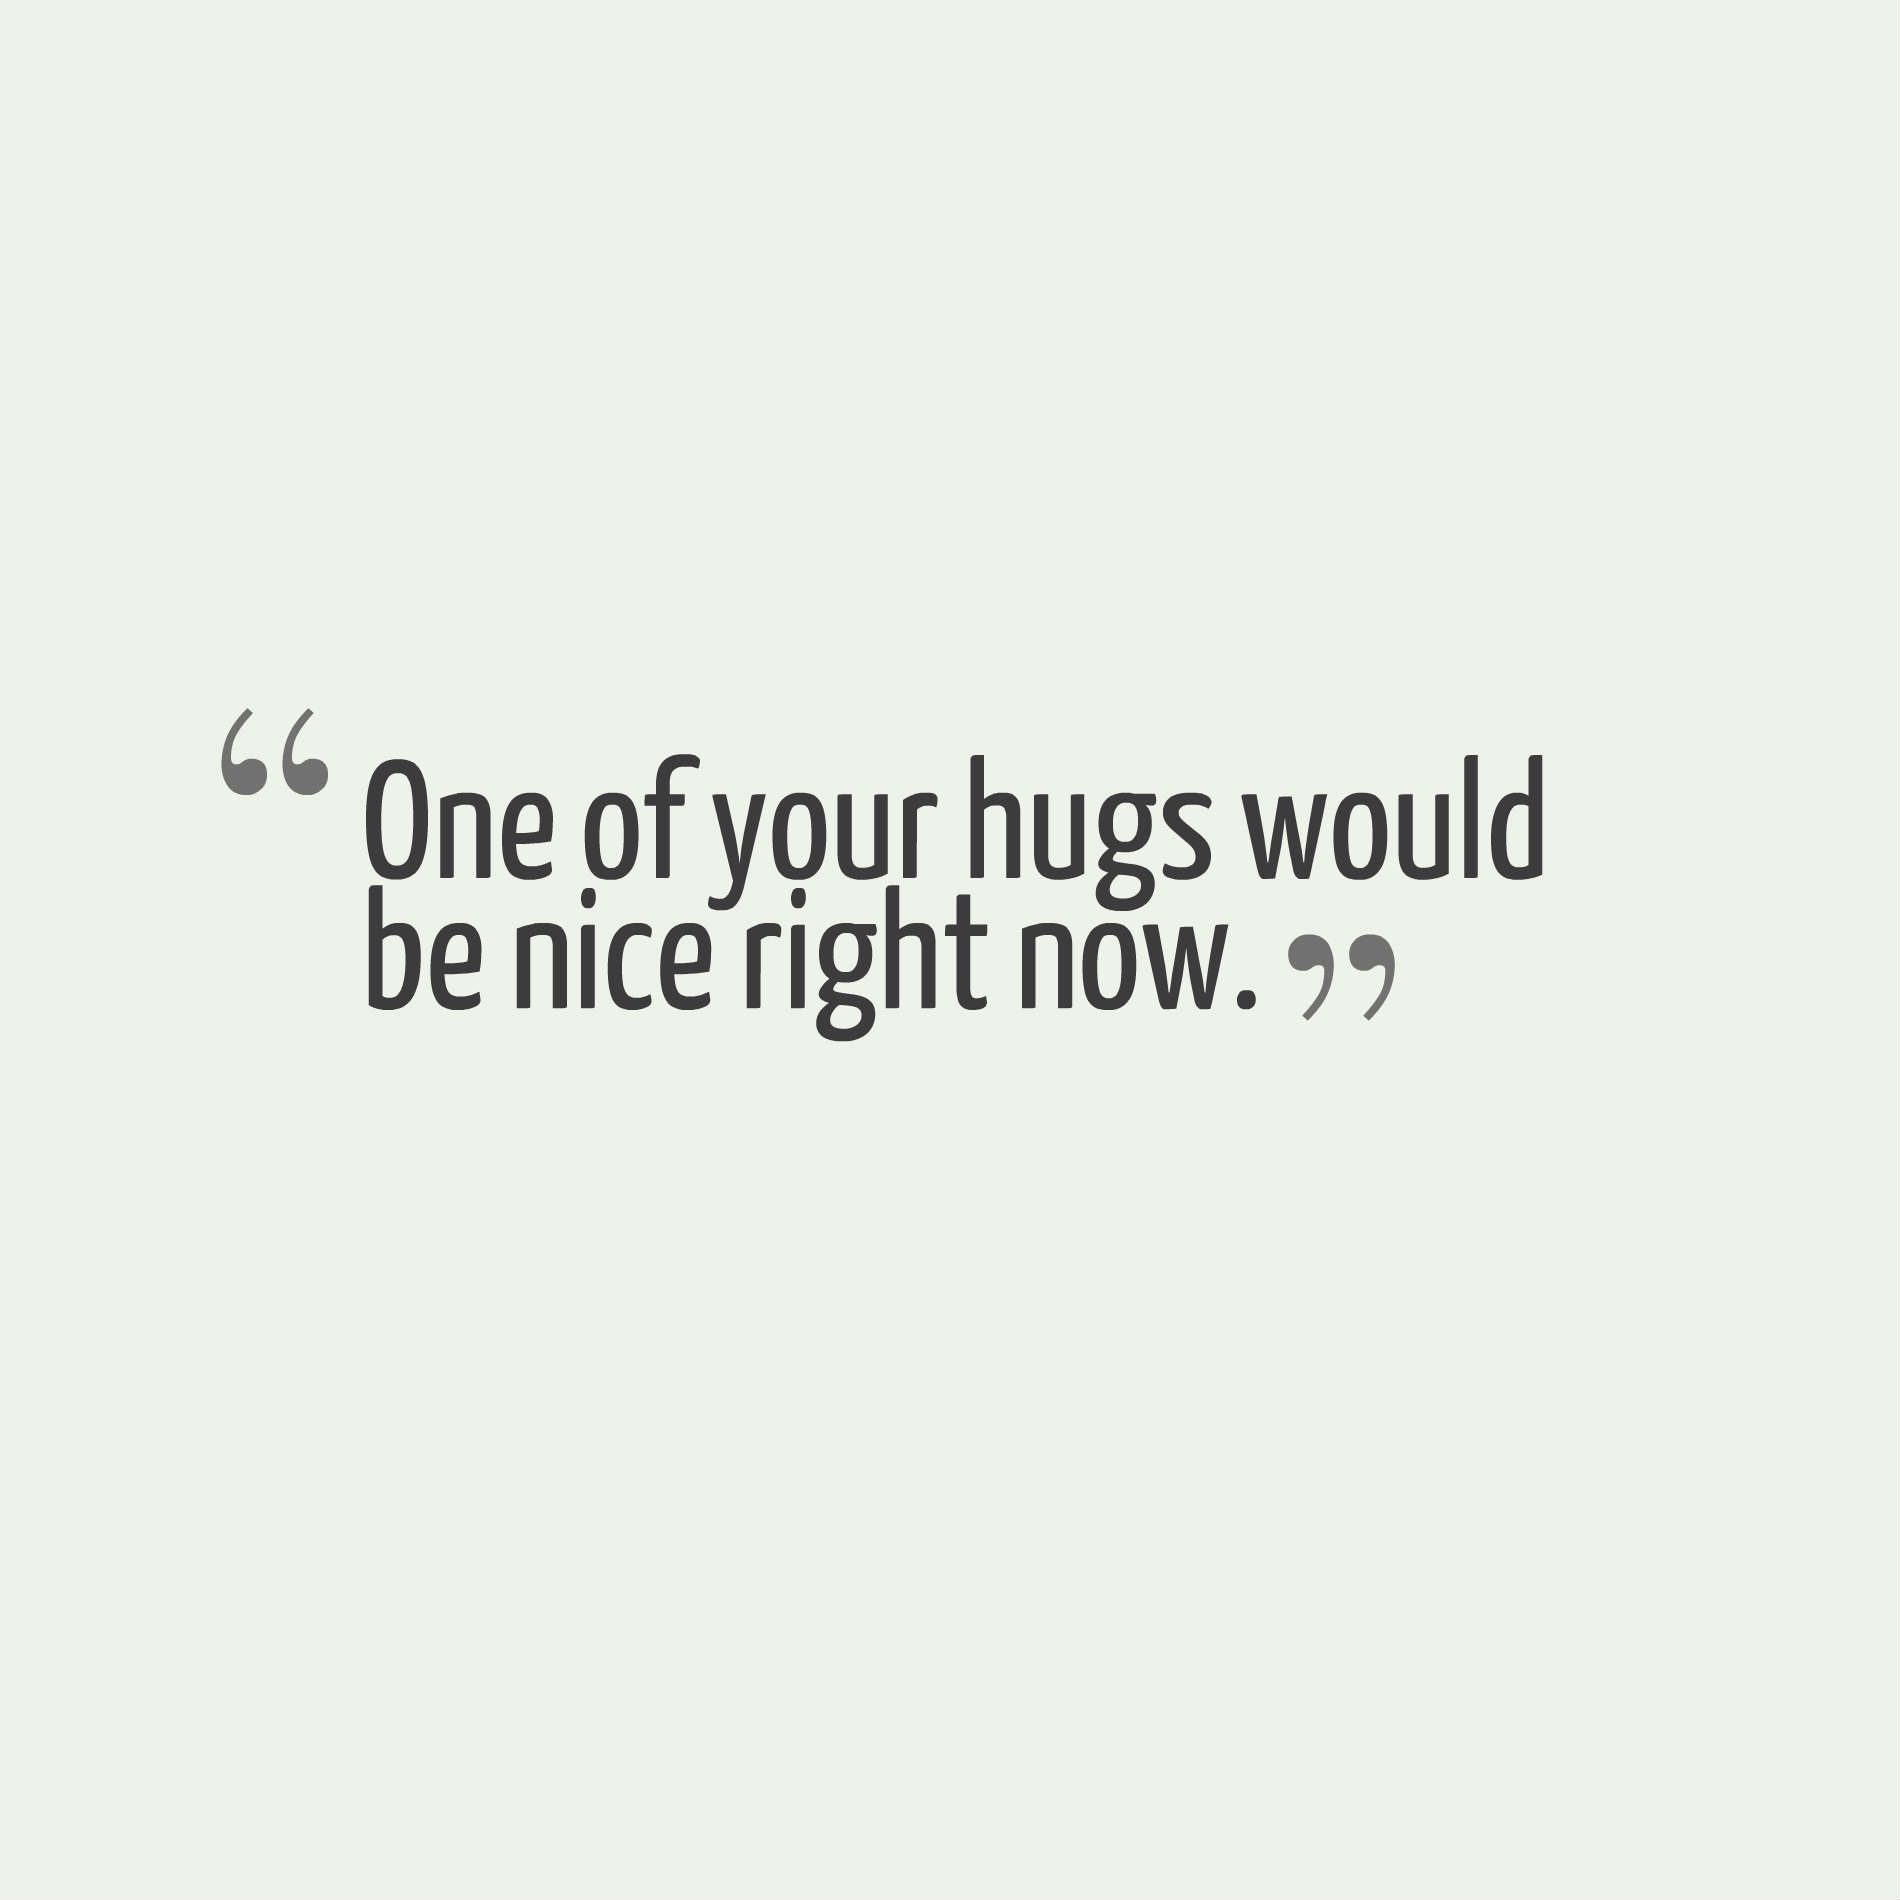 One of your hugs would be nice right now.